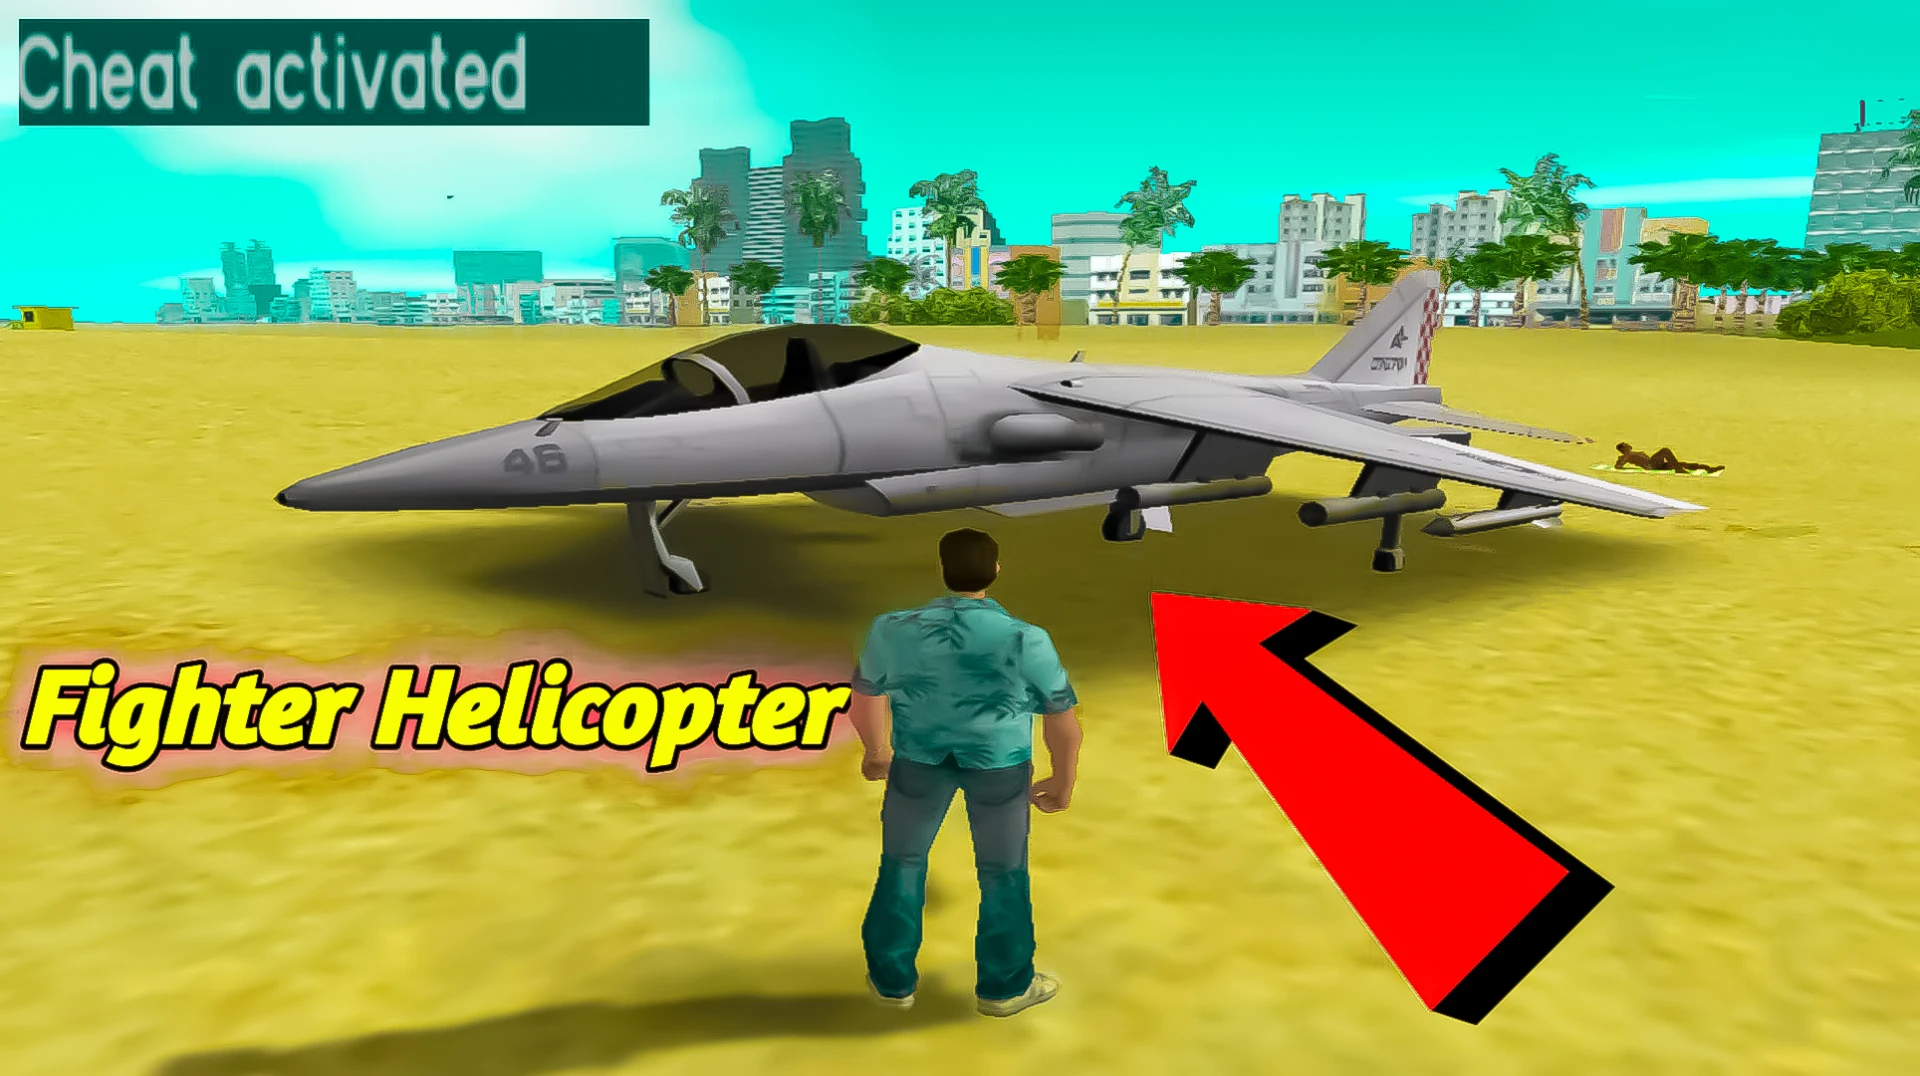 GTA Vice City cheat codes for money, helicopter, car, health, and